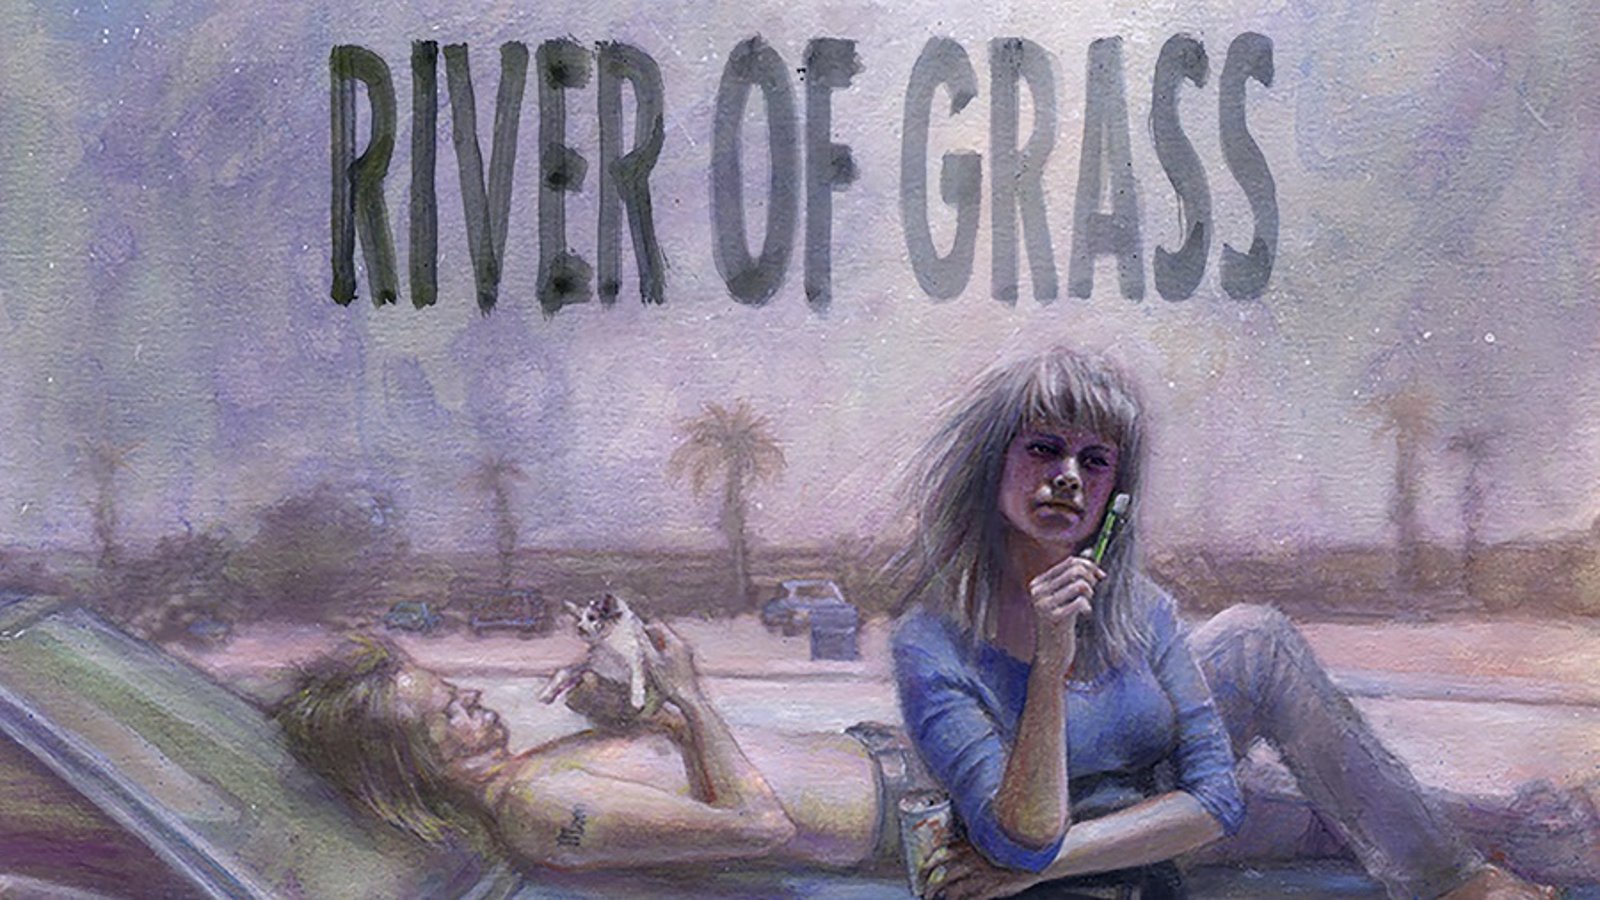 River Of Grass